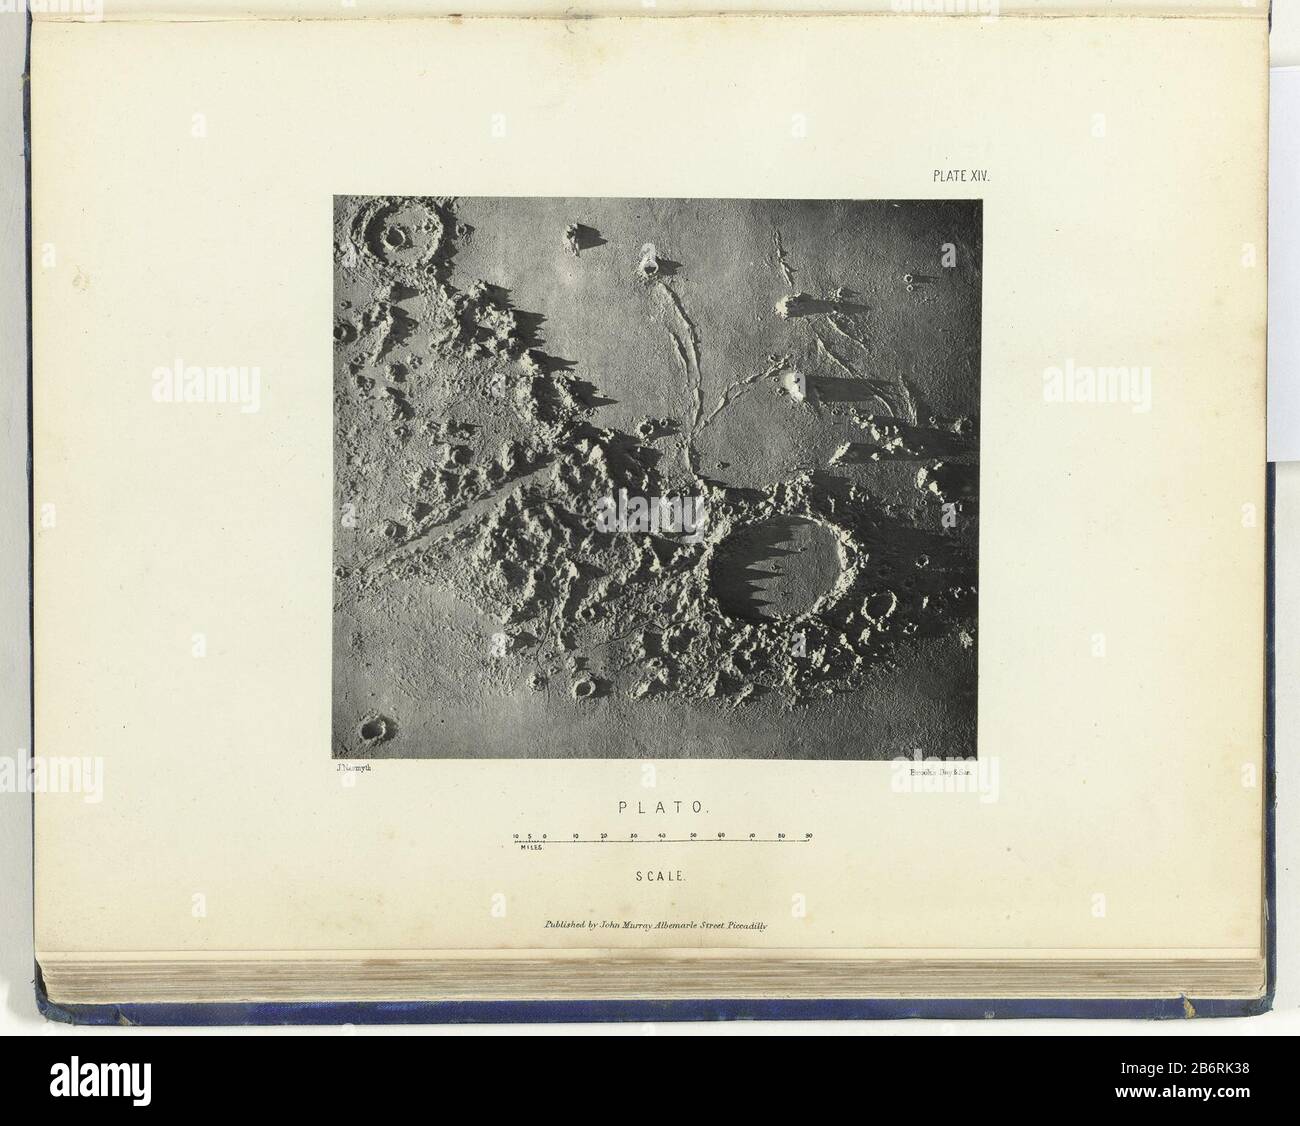 Gipsmodel van de maankrater Plato, van bovenaf gezien Plato (titel op object) Gypsum model of the lunar crater Plato, seen from above plato (title object) Property Type: photomechanical print page Item number: RP-F 2001-7-489-15 Inscriptions / Brands: number, recto, printed 'Plate XIV.'opschrift, recto, printed: 'scale.', the text above a scale in miles name, recto, printed: 'Published by John Murray, Albemarle Street, Piccadilly.' Manufacturer : photographer: James Nasmyth (listed building) clichémaker : anonymous printer: Day & Son, Vincent Brooks (listed building) Publisher: John Murray (li Stock Photo